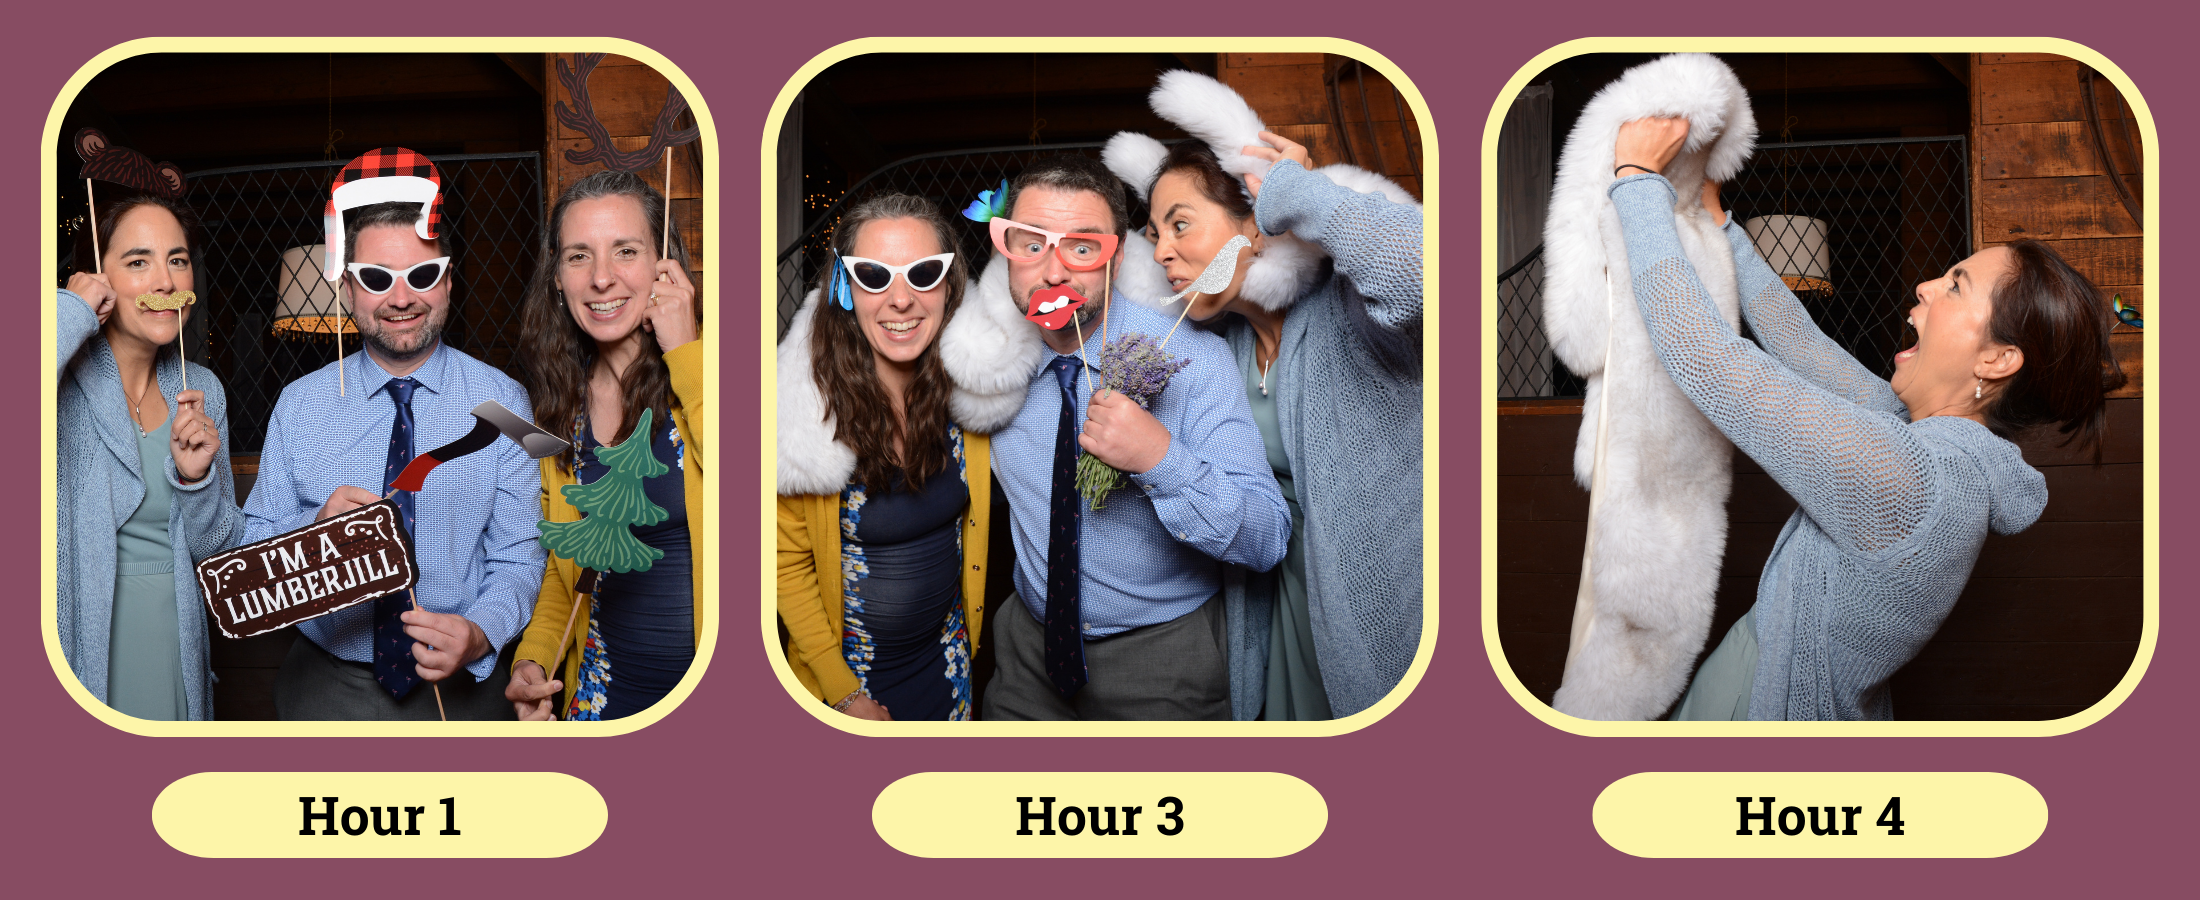 Three photo booth images labeled �Hour 1�, �Hour 3�, and �Hour 4�, showing one guest getting more entertaining as the night goes on.